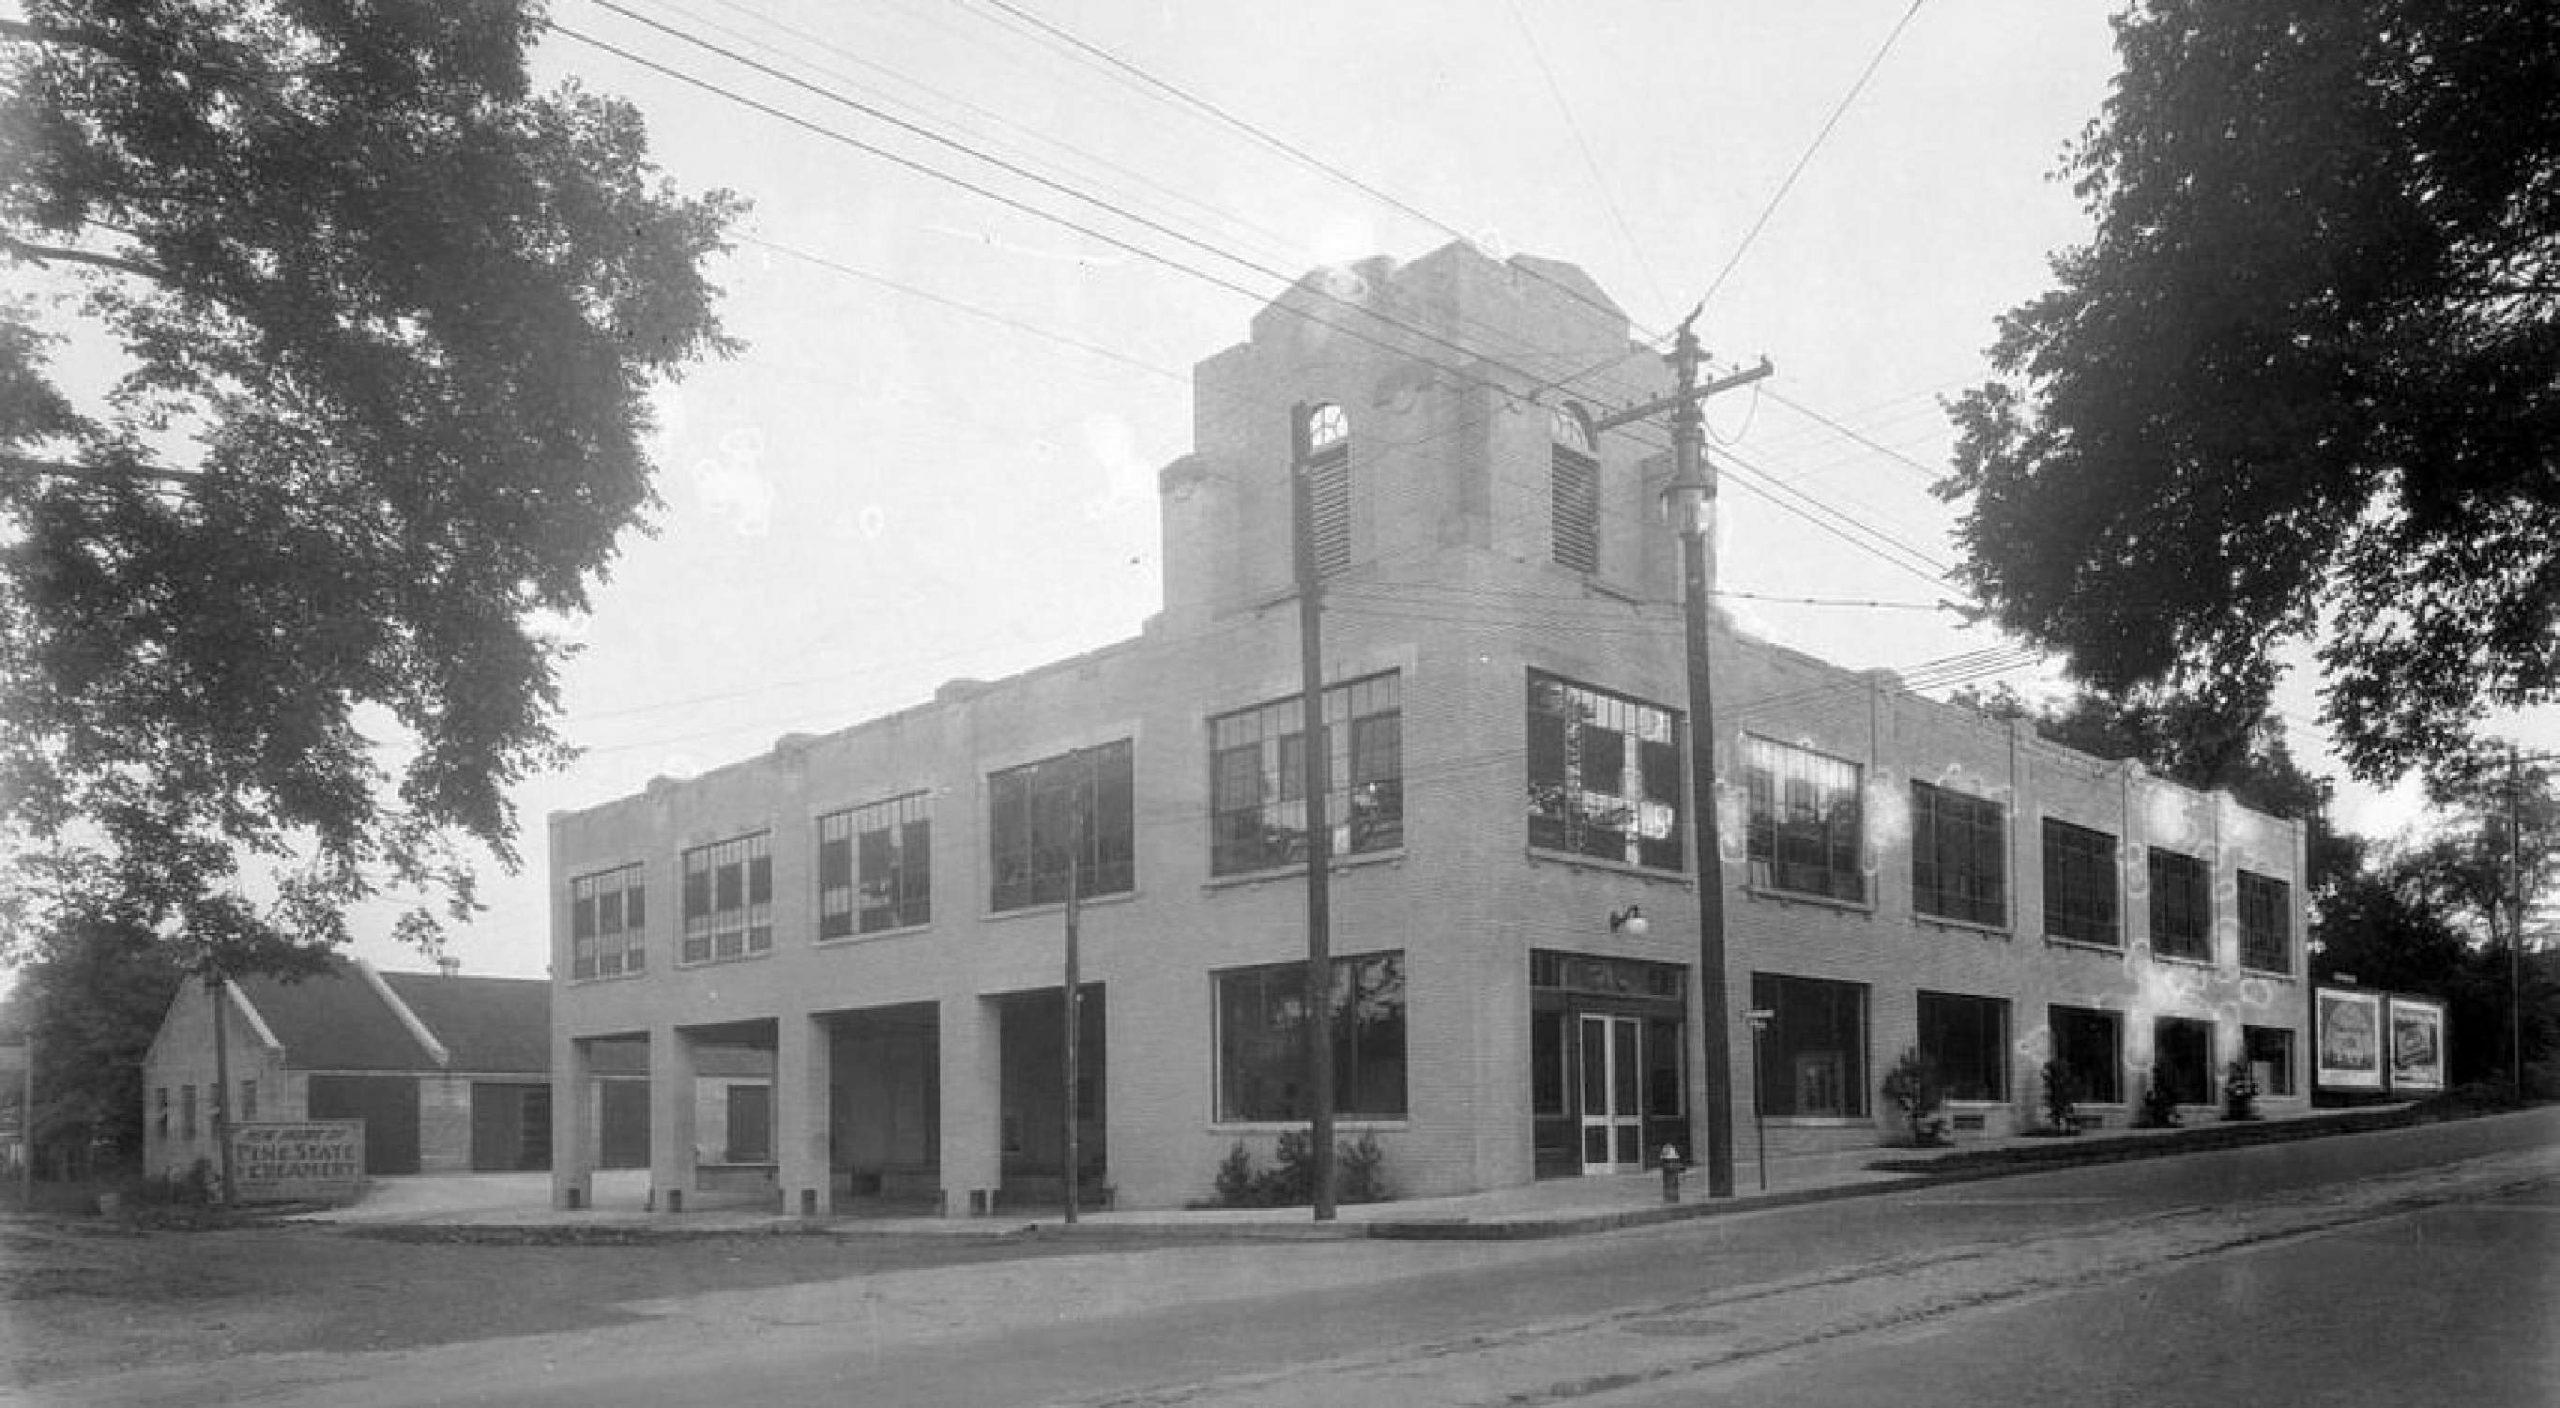 Old photo of historic Raleigh, showing the original Creamery building